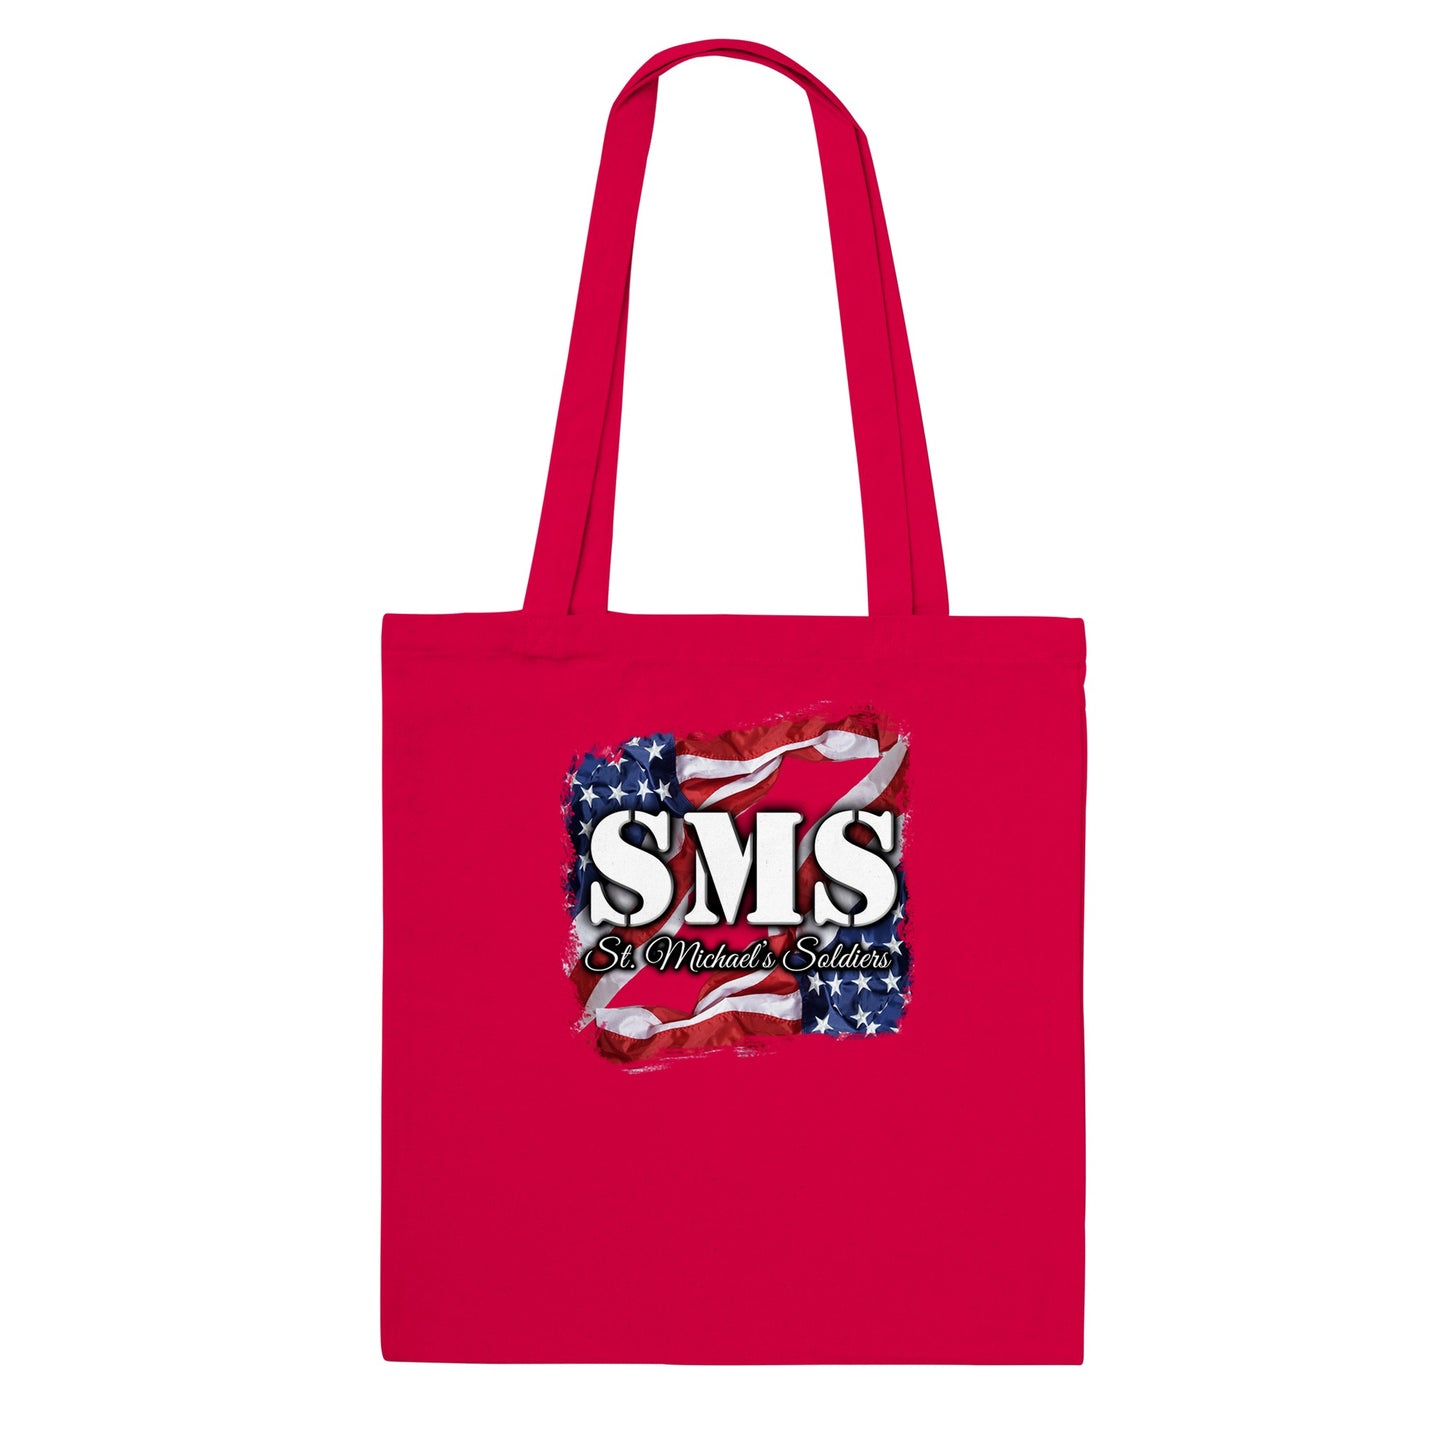 SMS (Flag1) - Classic Tote Bag